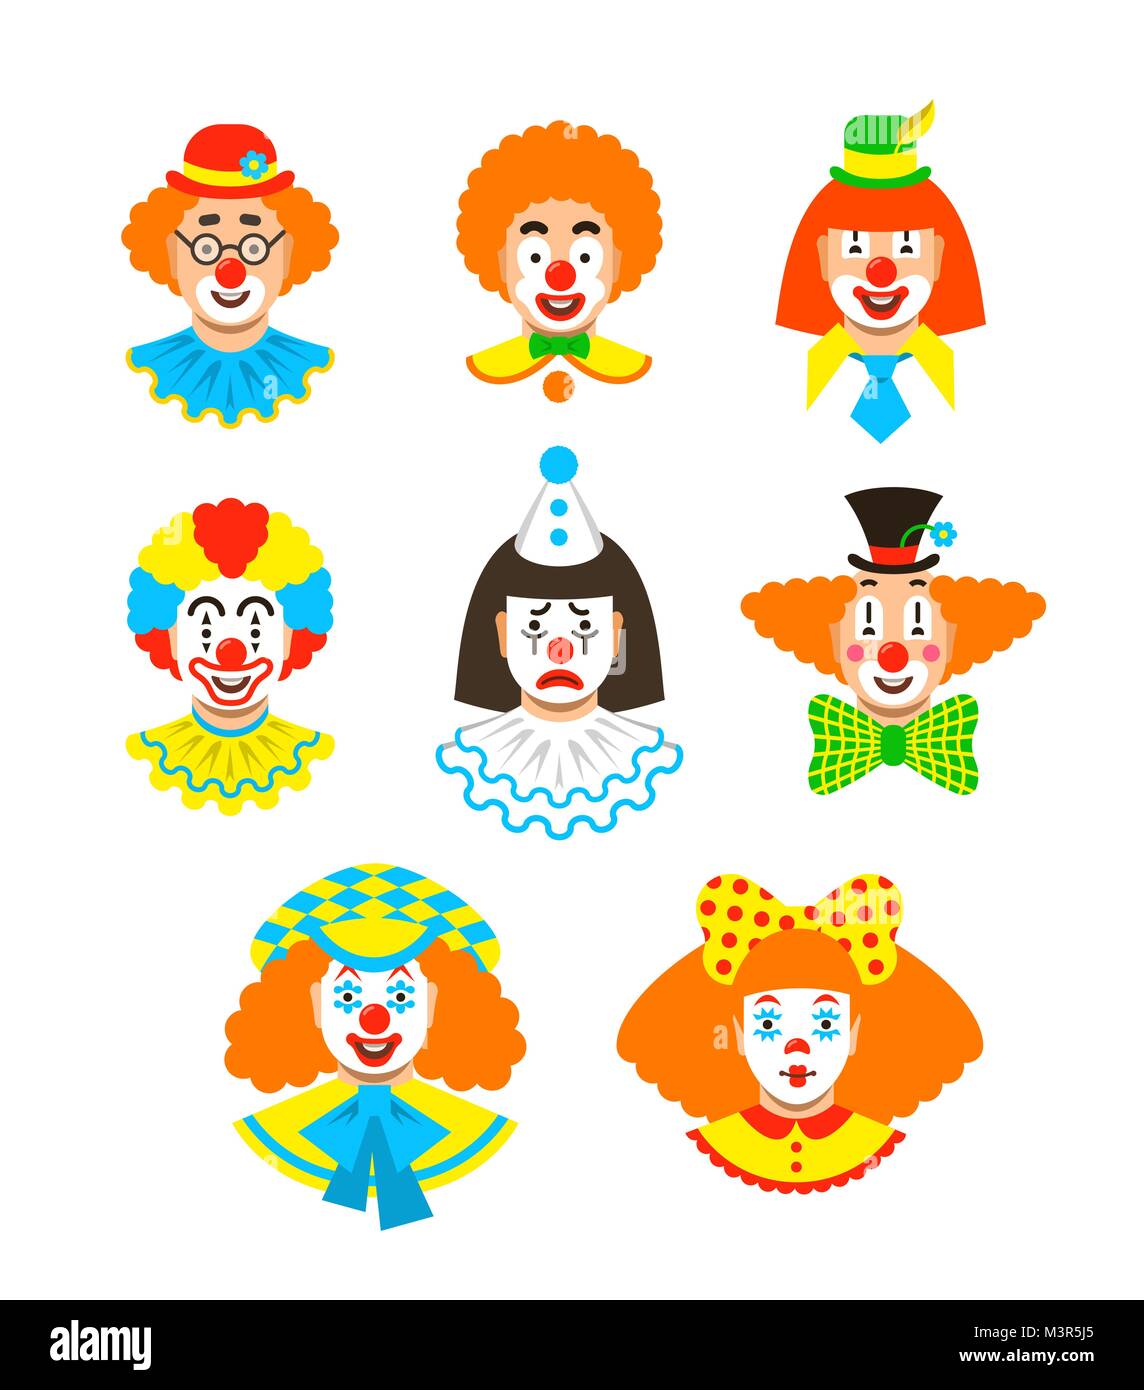 Clown faces different avatars. Vector flat icons. Cartoon illustration. Circus men and girl smiling portraits with different makeup, hair and hats Stock Vector